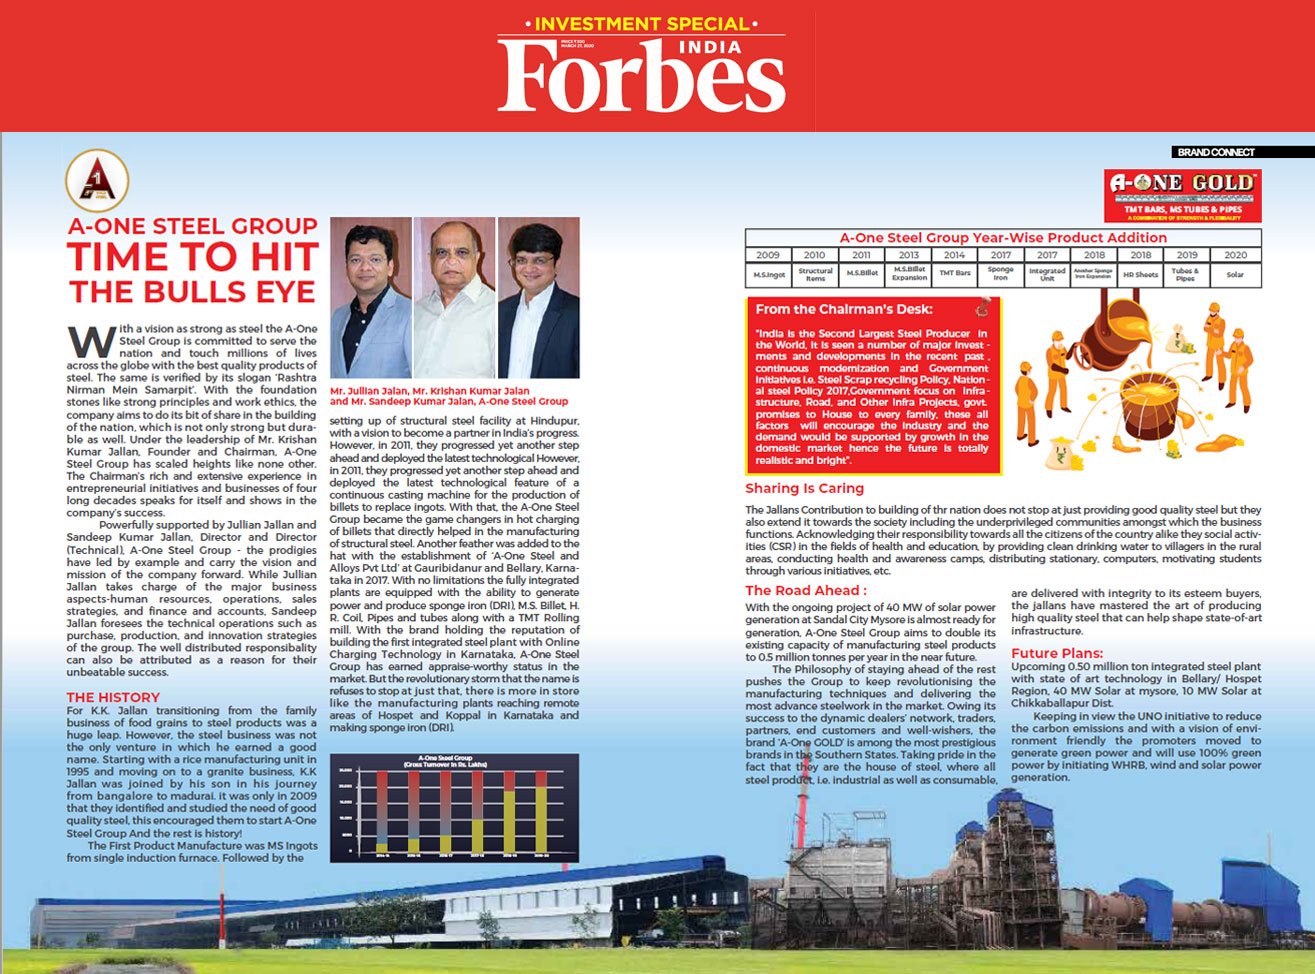 Forbes Investment Special